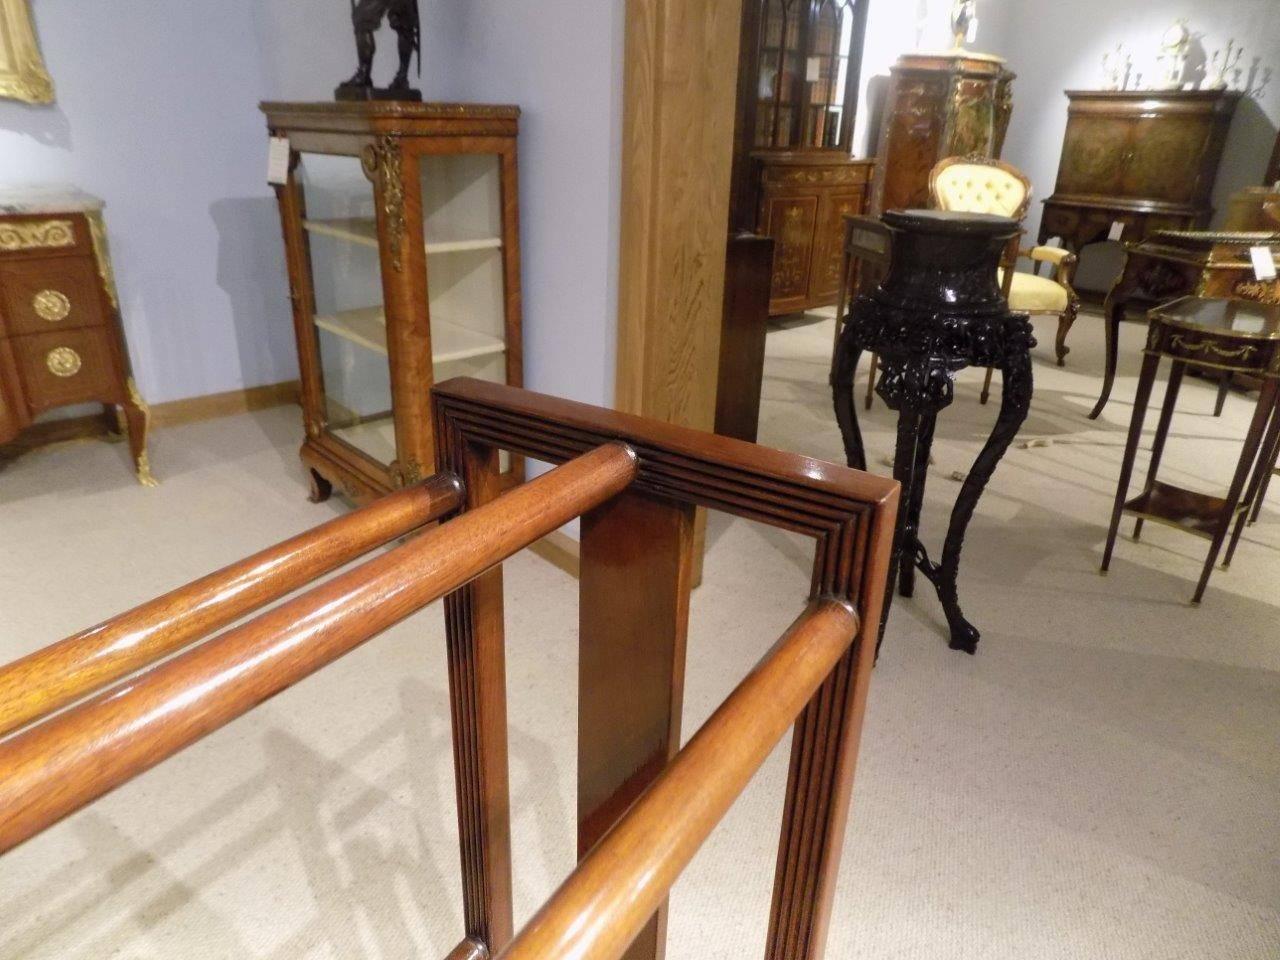 A find quality mahogany Edwardian period towel rail. With quadruple reeded moulding to the ends and with satinwood inlaid detail. Having five turned mahogany towel rails and raised on four turned mahogany feet undated by a plum pudding shelf.